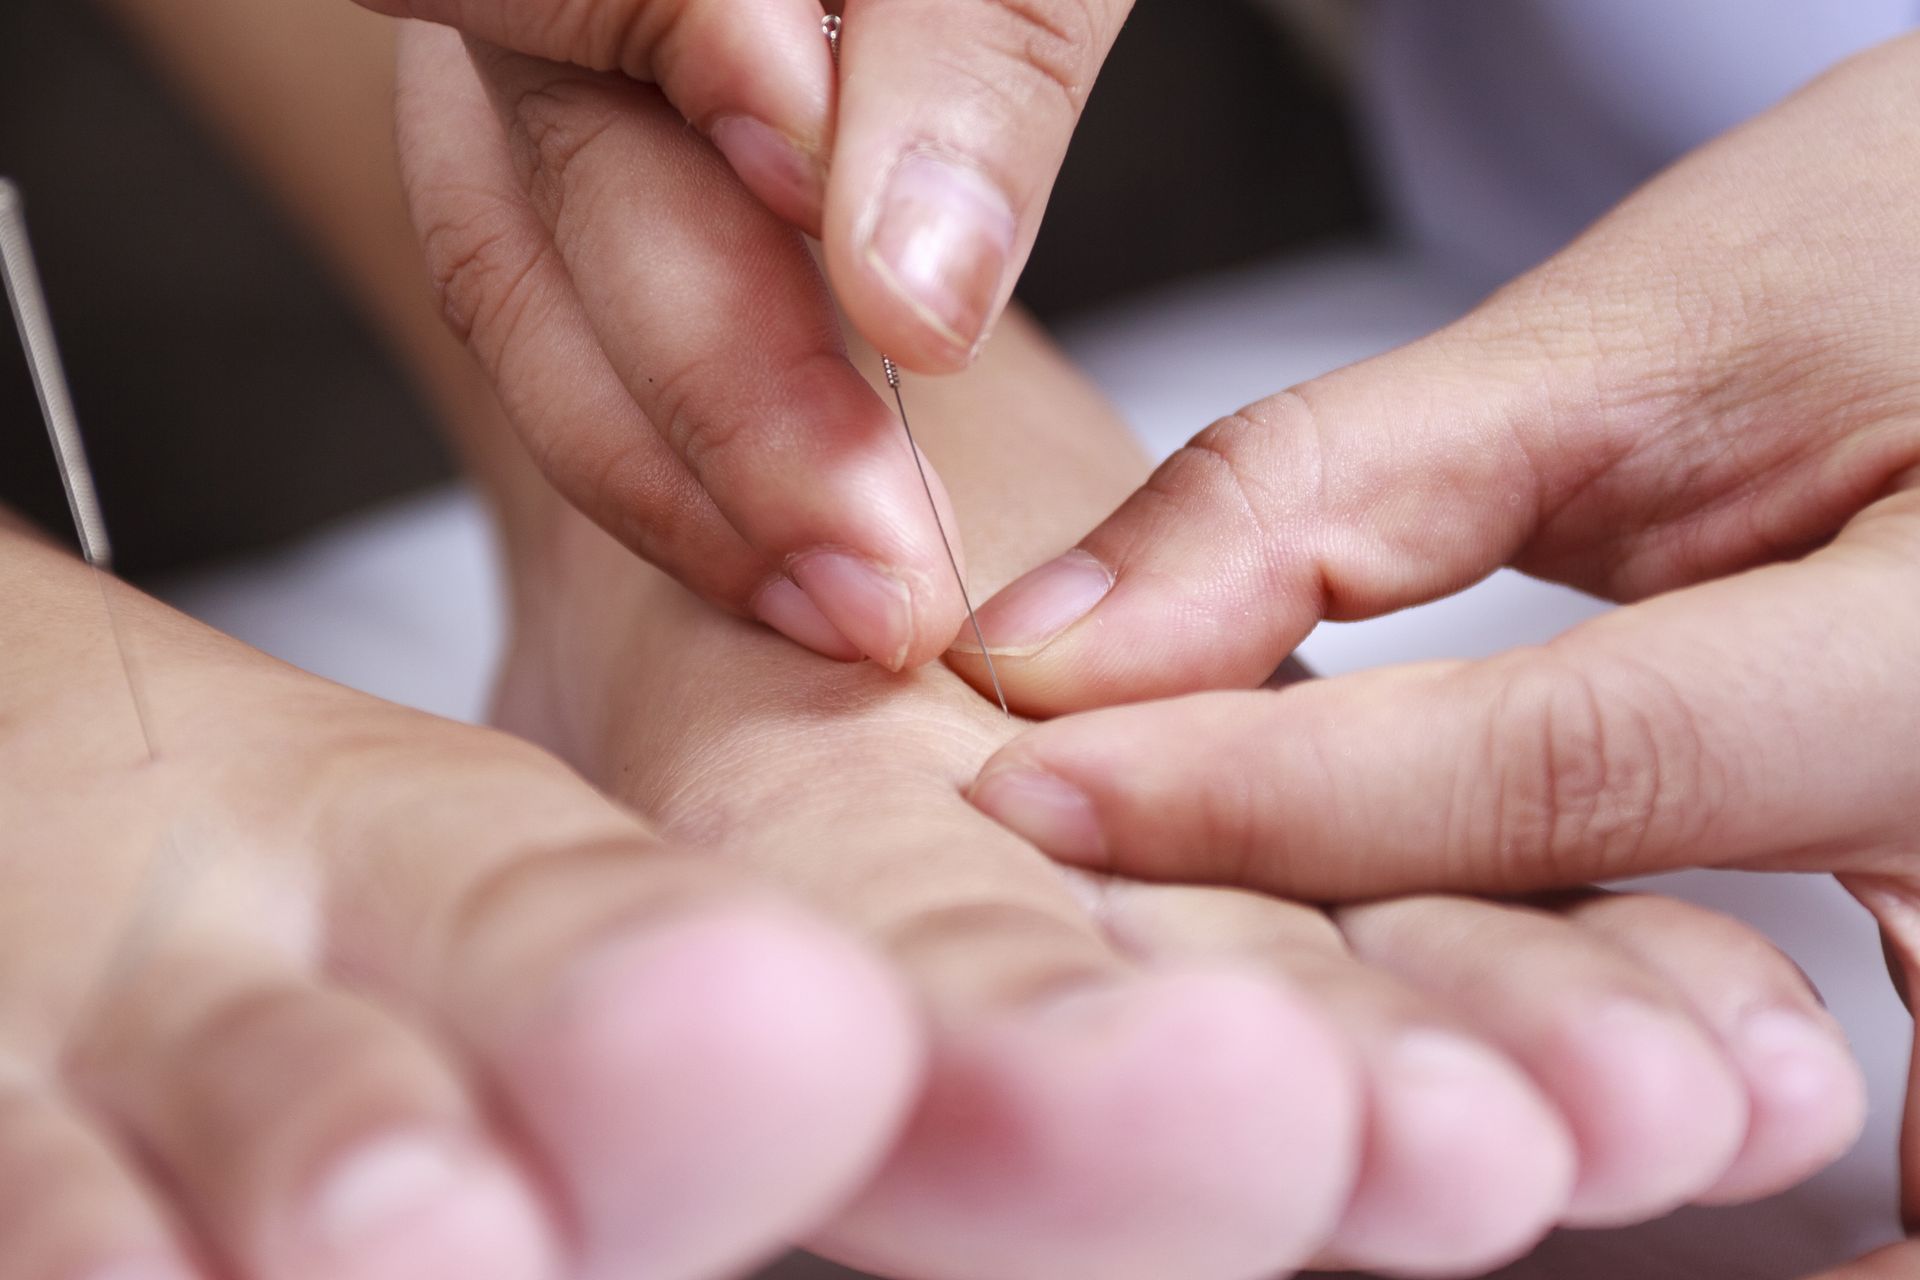 A pregnant person is getting acupuncture on their foot.